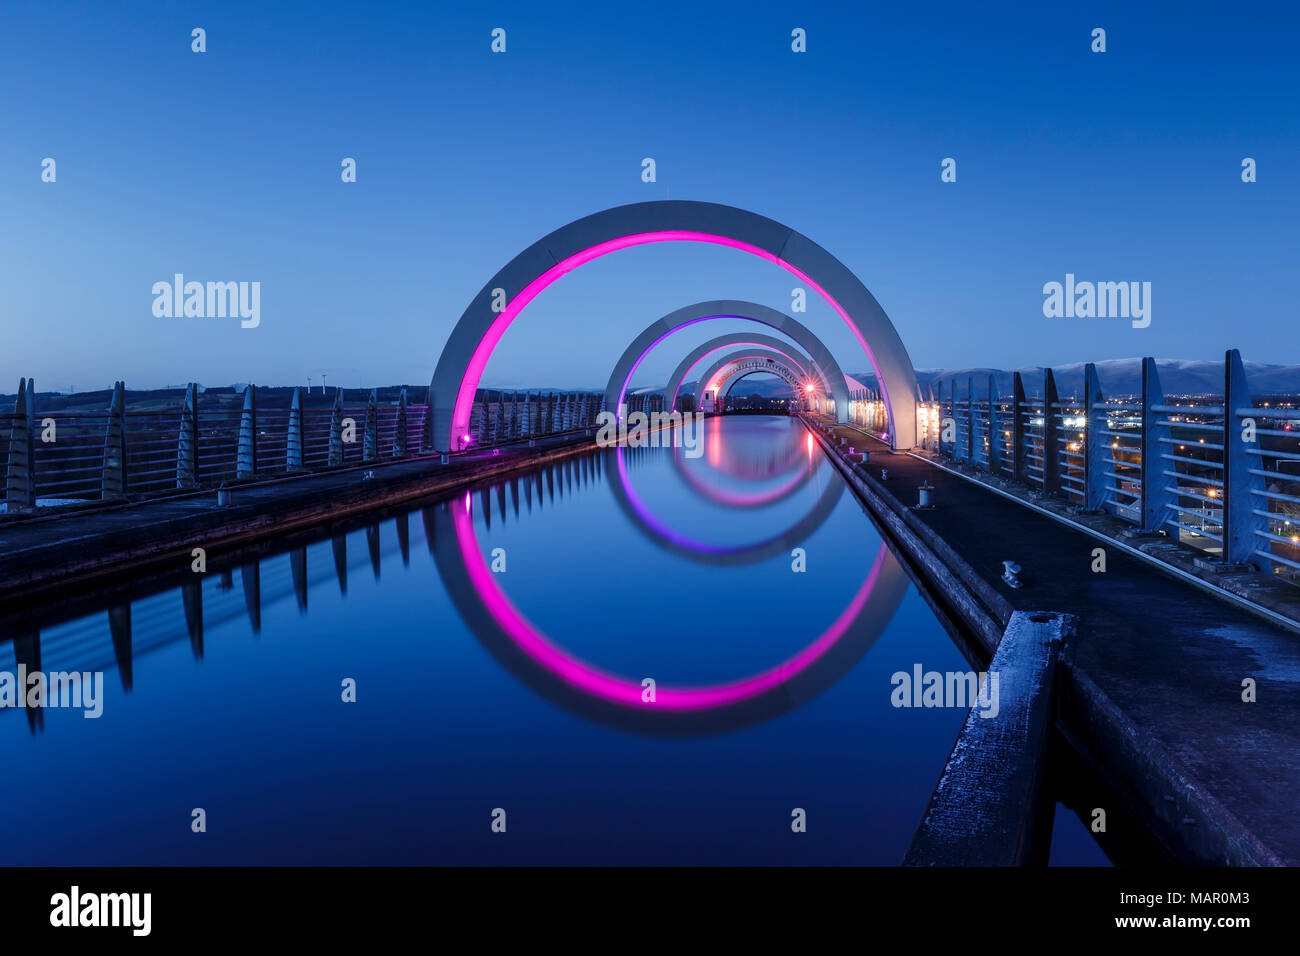 The Falkirk Wheel, connecting the Forth Clyde Canal to the Union Canal, Falkirk, Stirlingshire, Scotland, United Kingdom, Europe Stock Photo